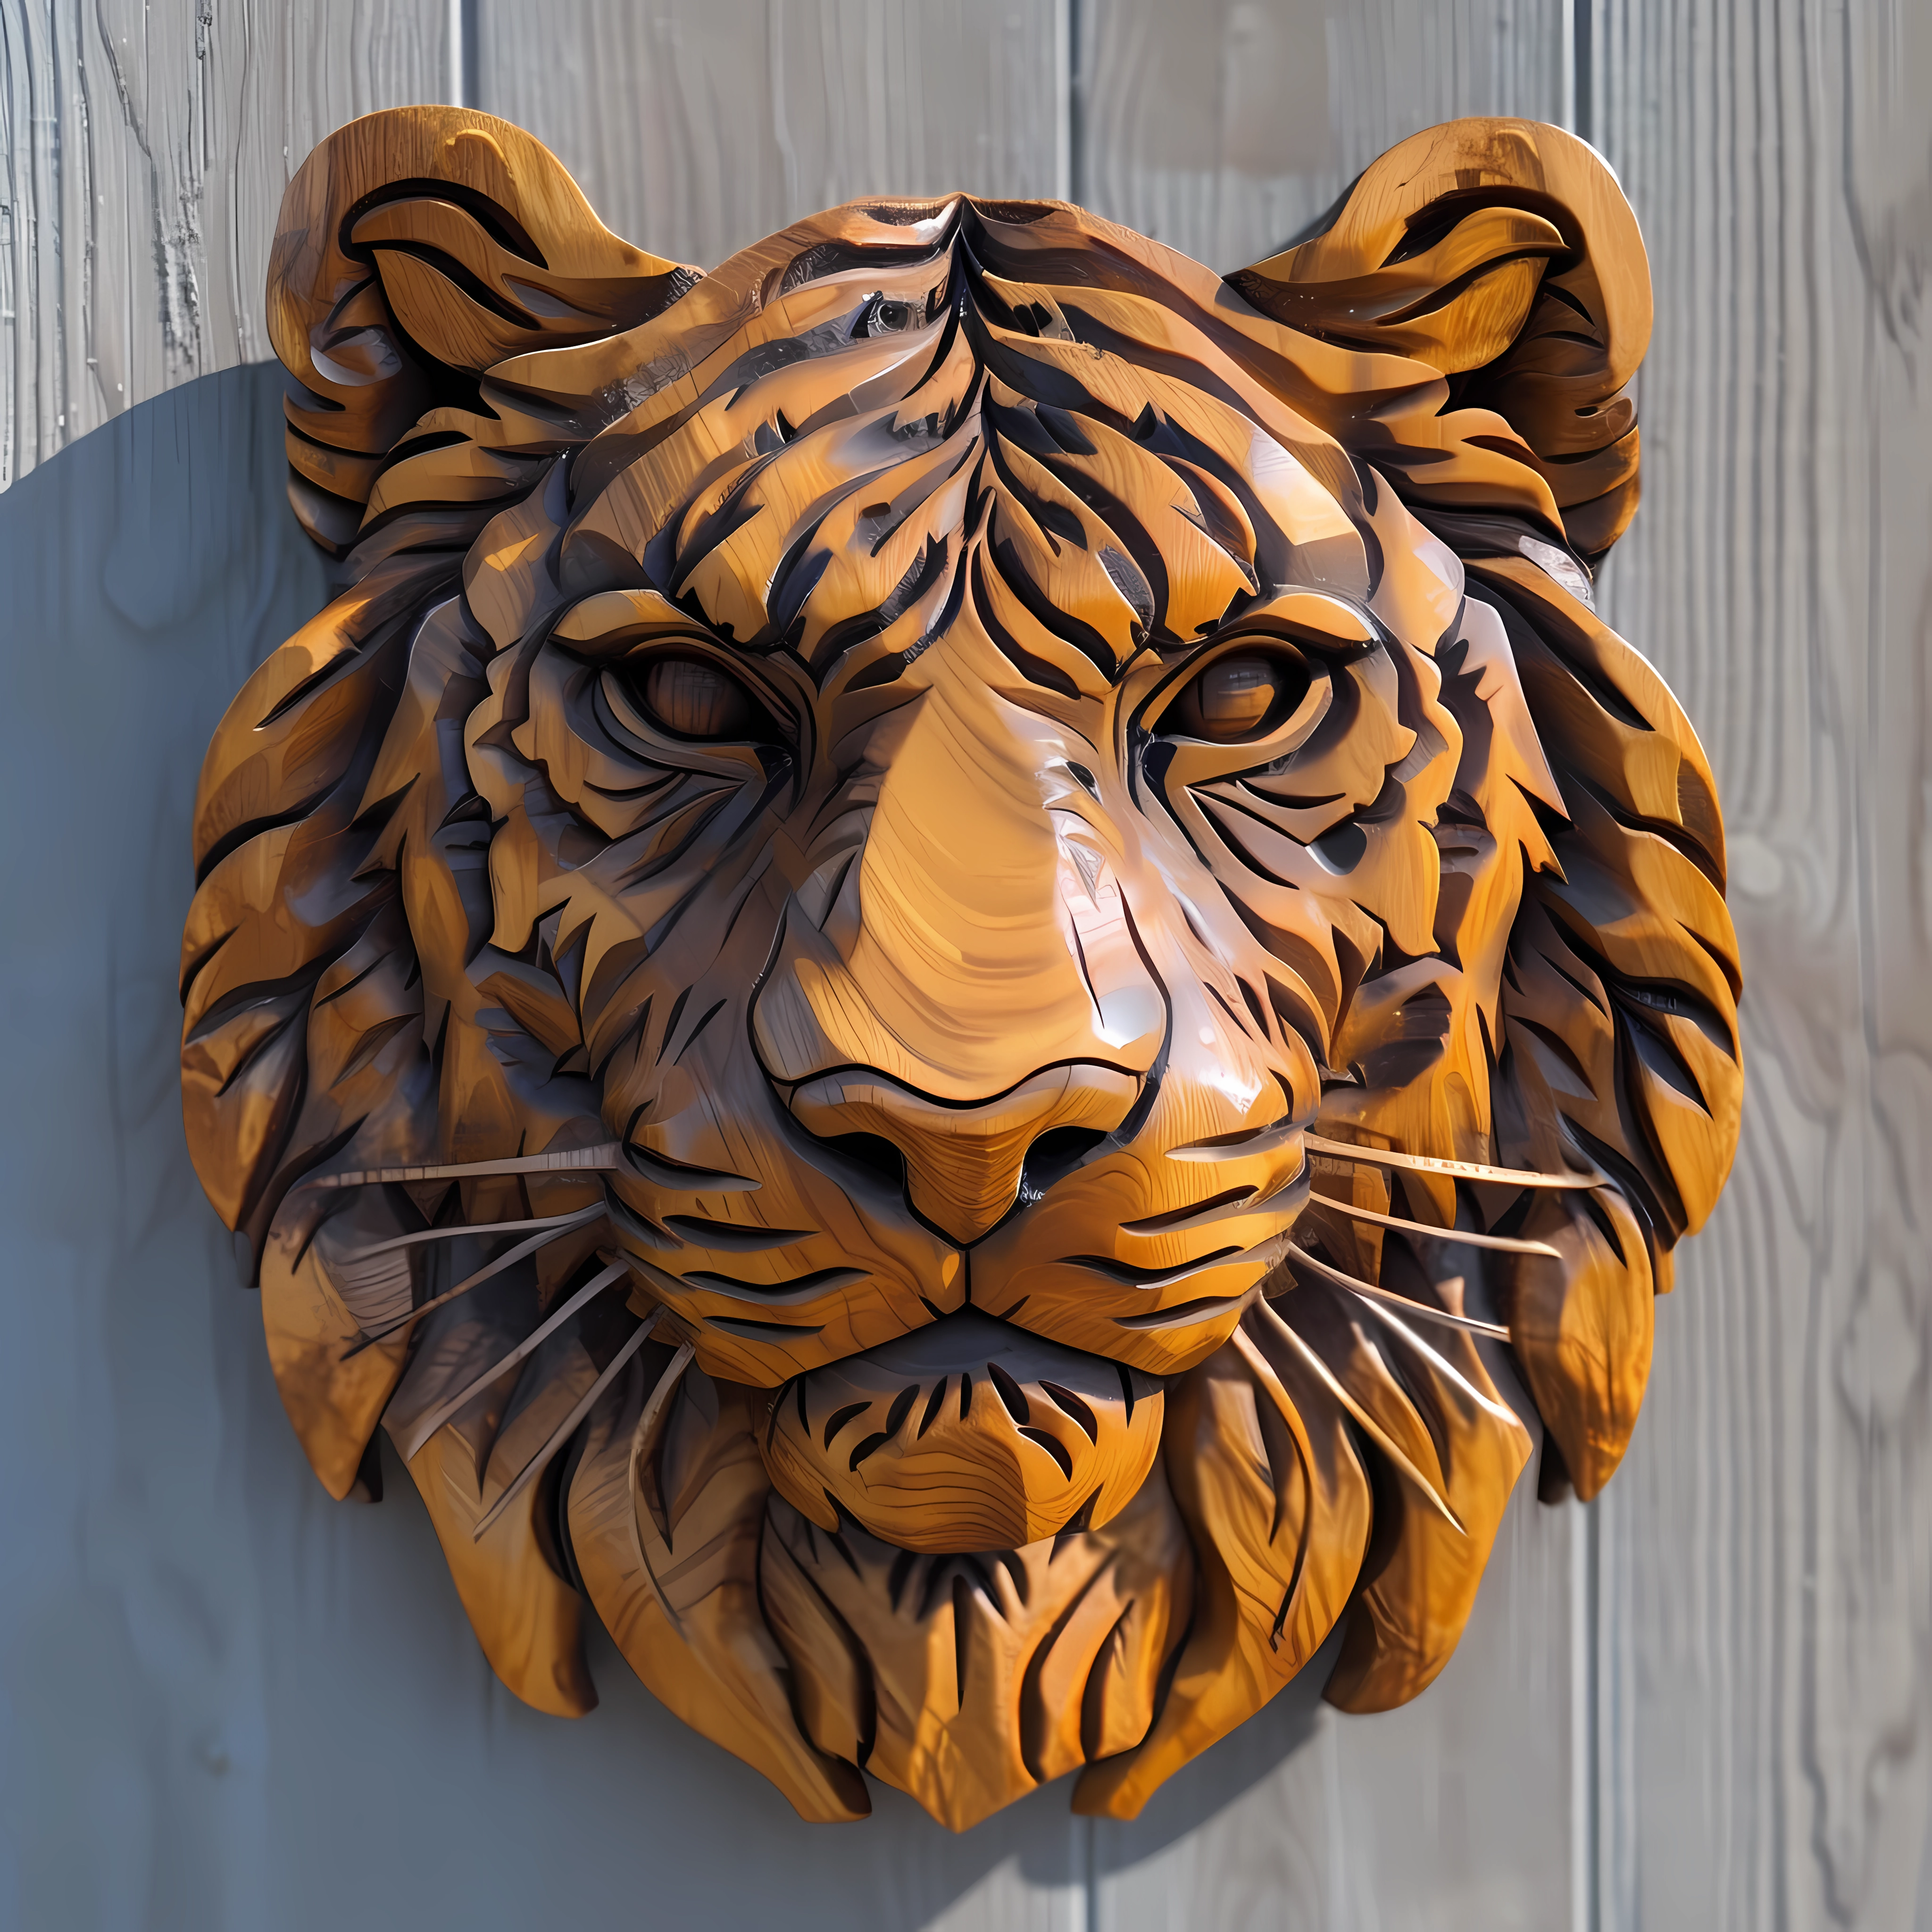 Intricate wood carving of a tiger's face for an avatar or profile picture, showcasing detailed craftsmanship.